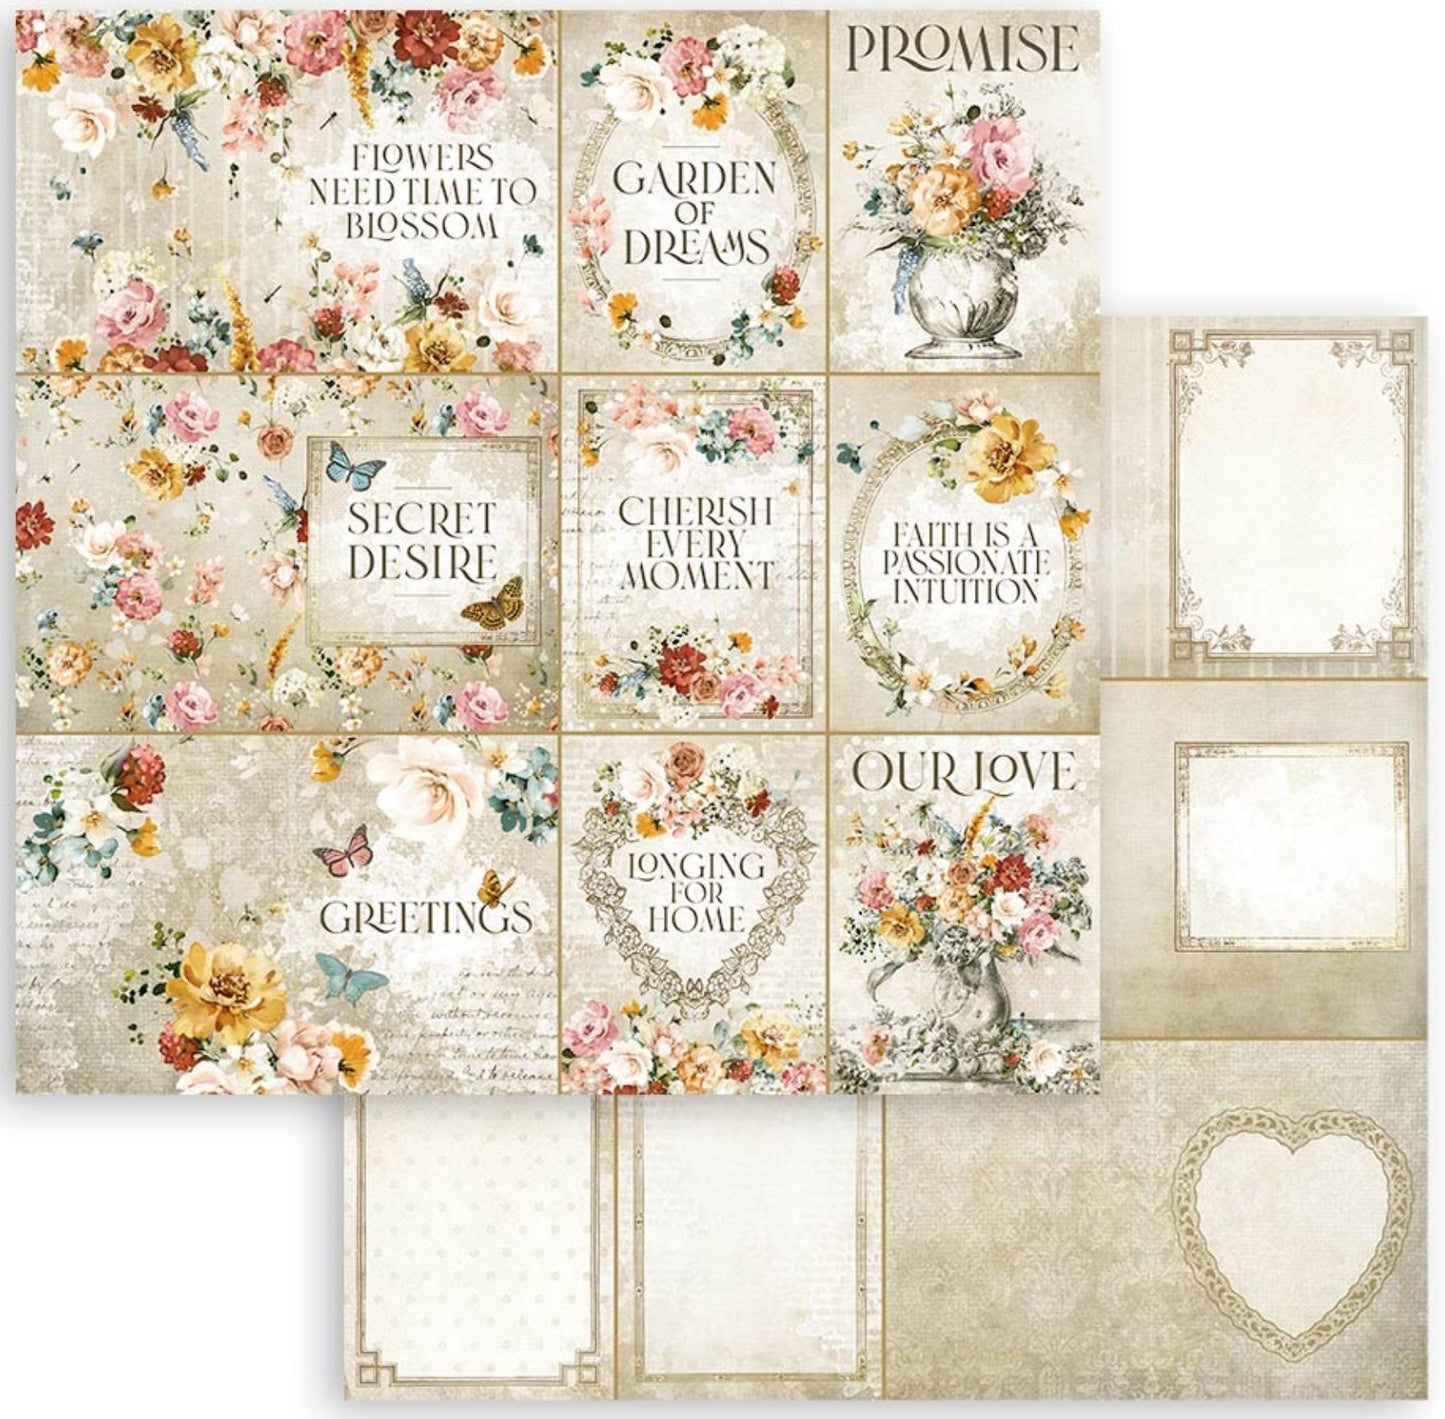 Stamperia - Scrapbooking Small Pad 10 sheets cm 20,3X20,3 (8"X8") - Garden of Promises Stamperia